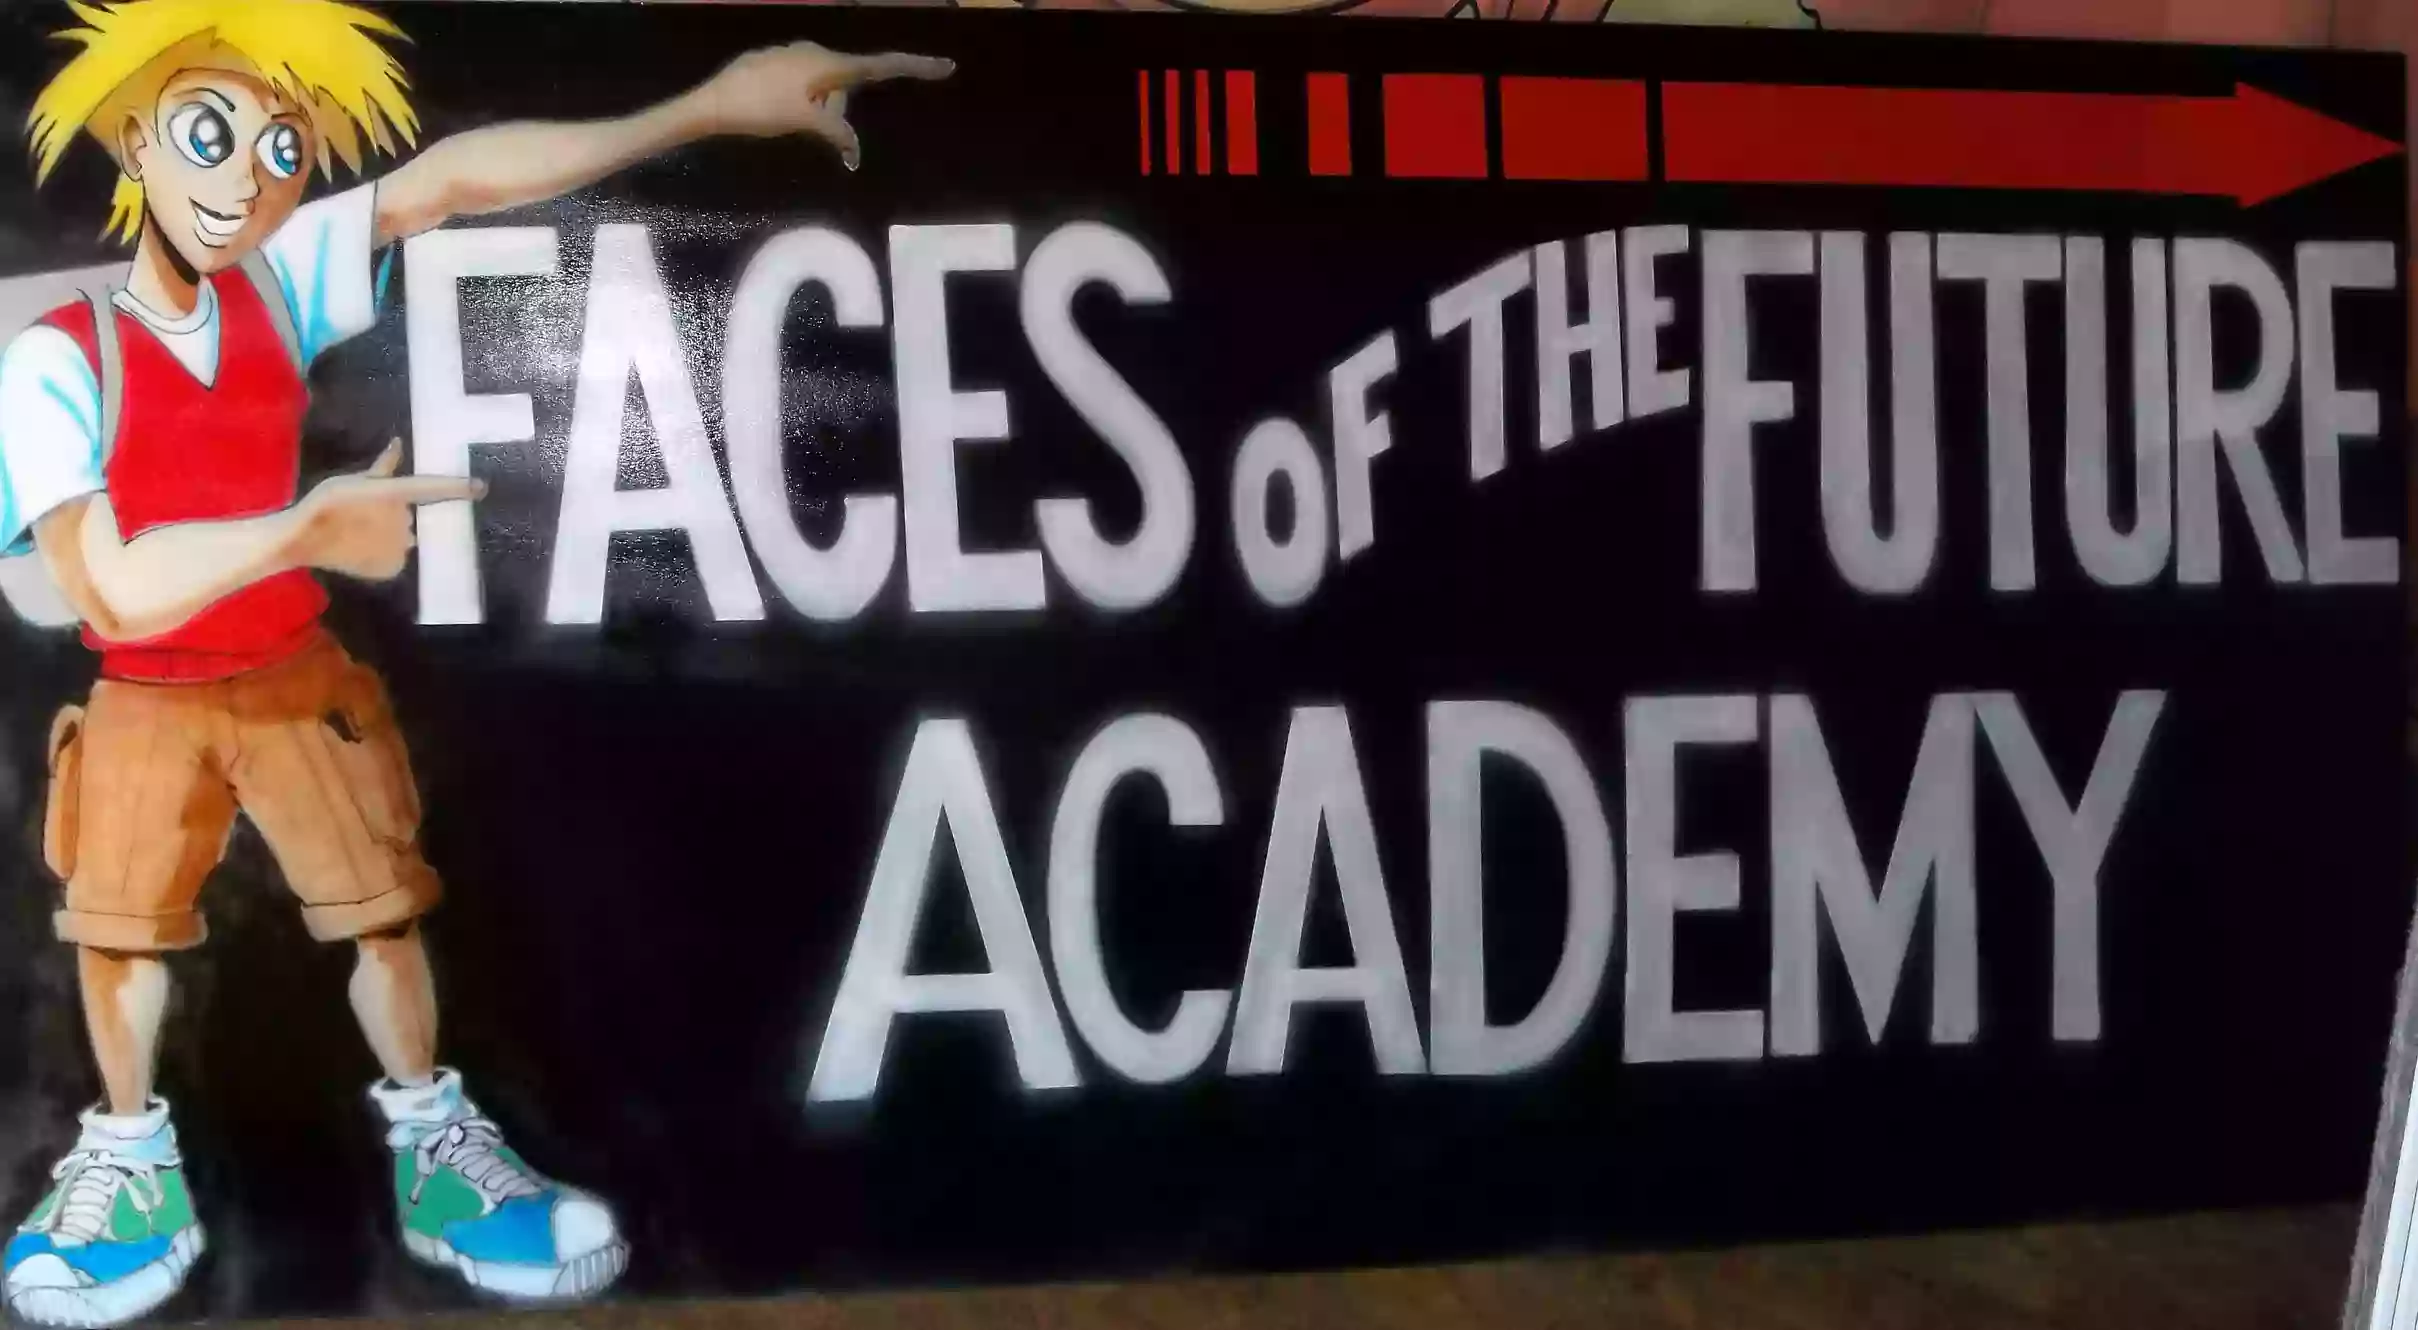 Faces of the Future Academy, Inc